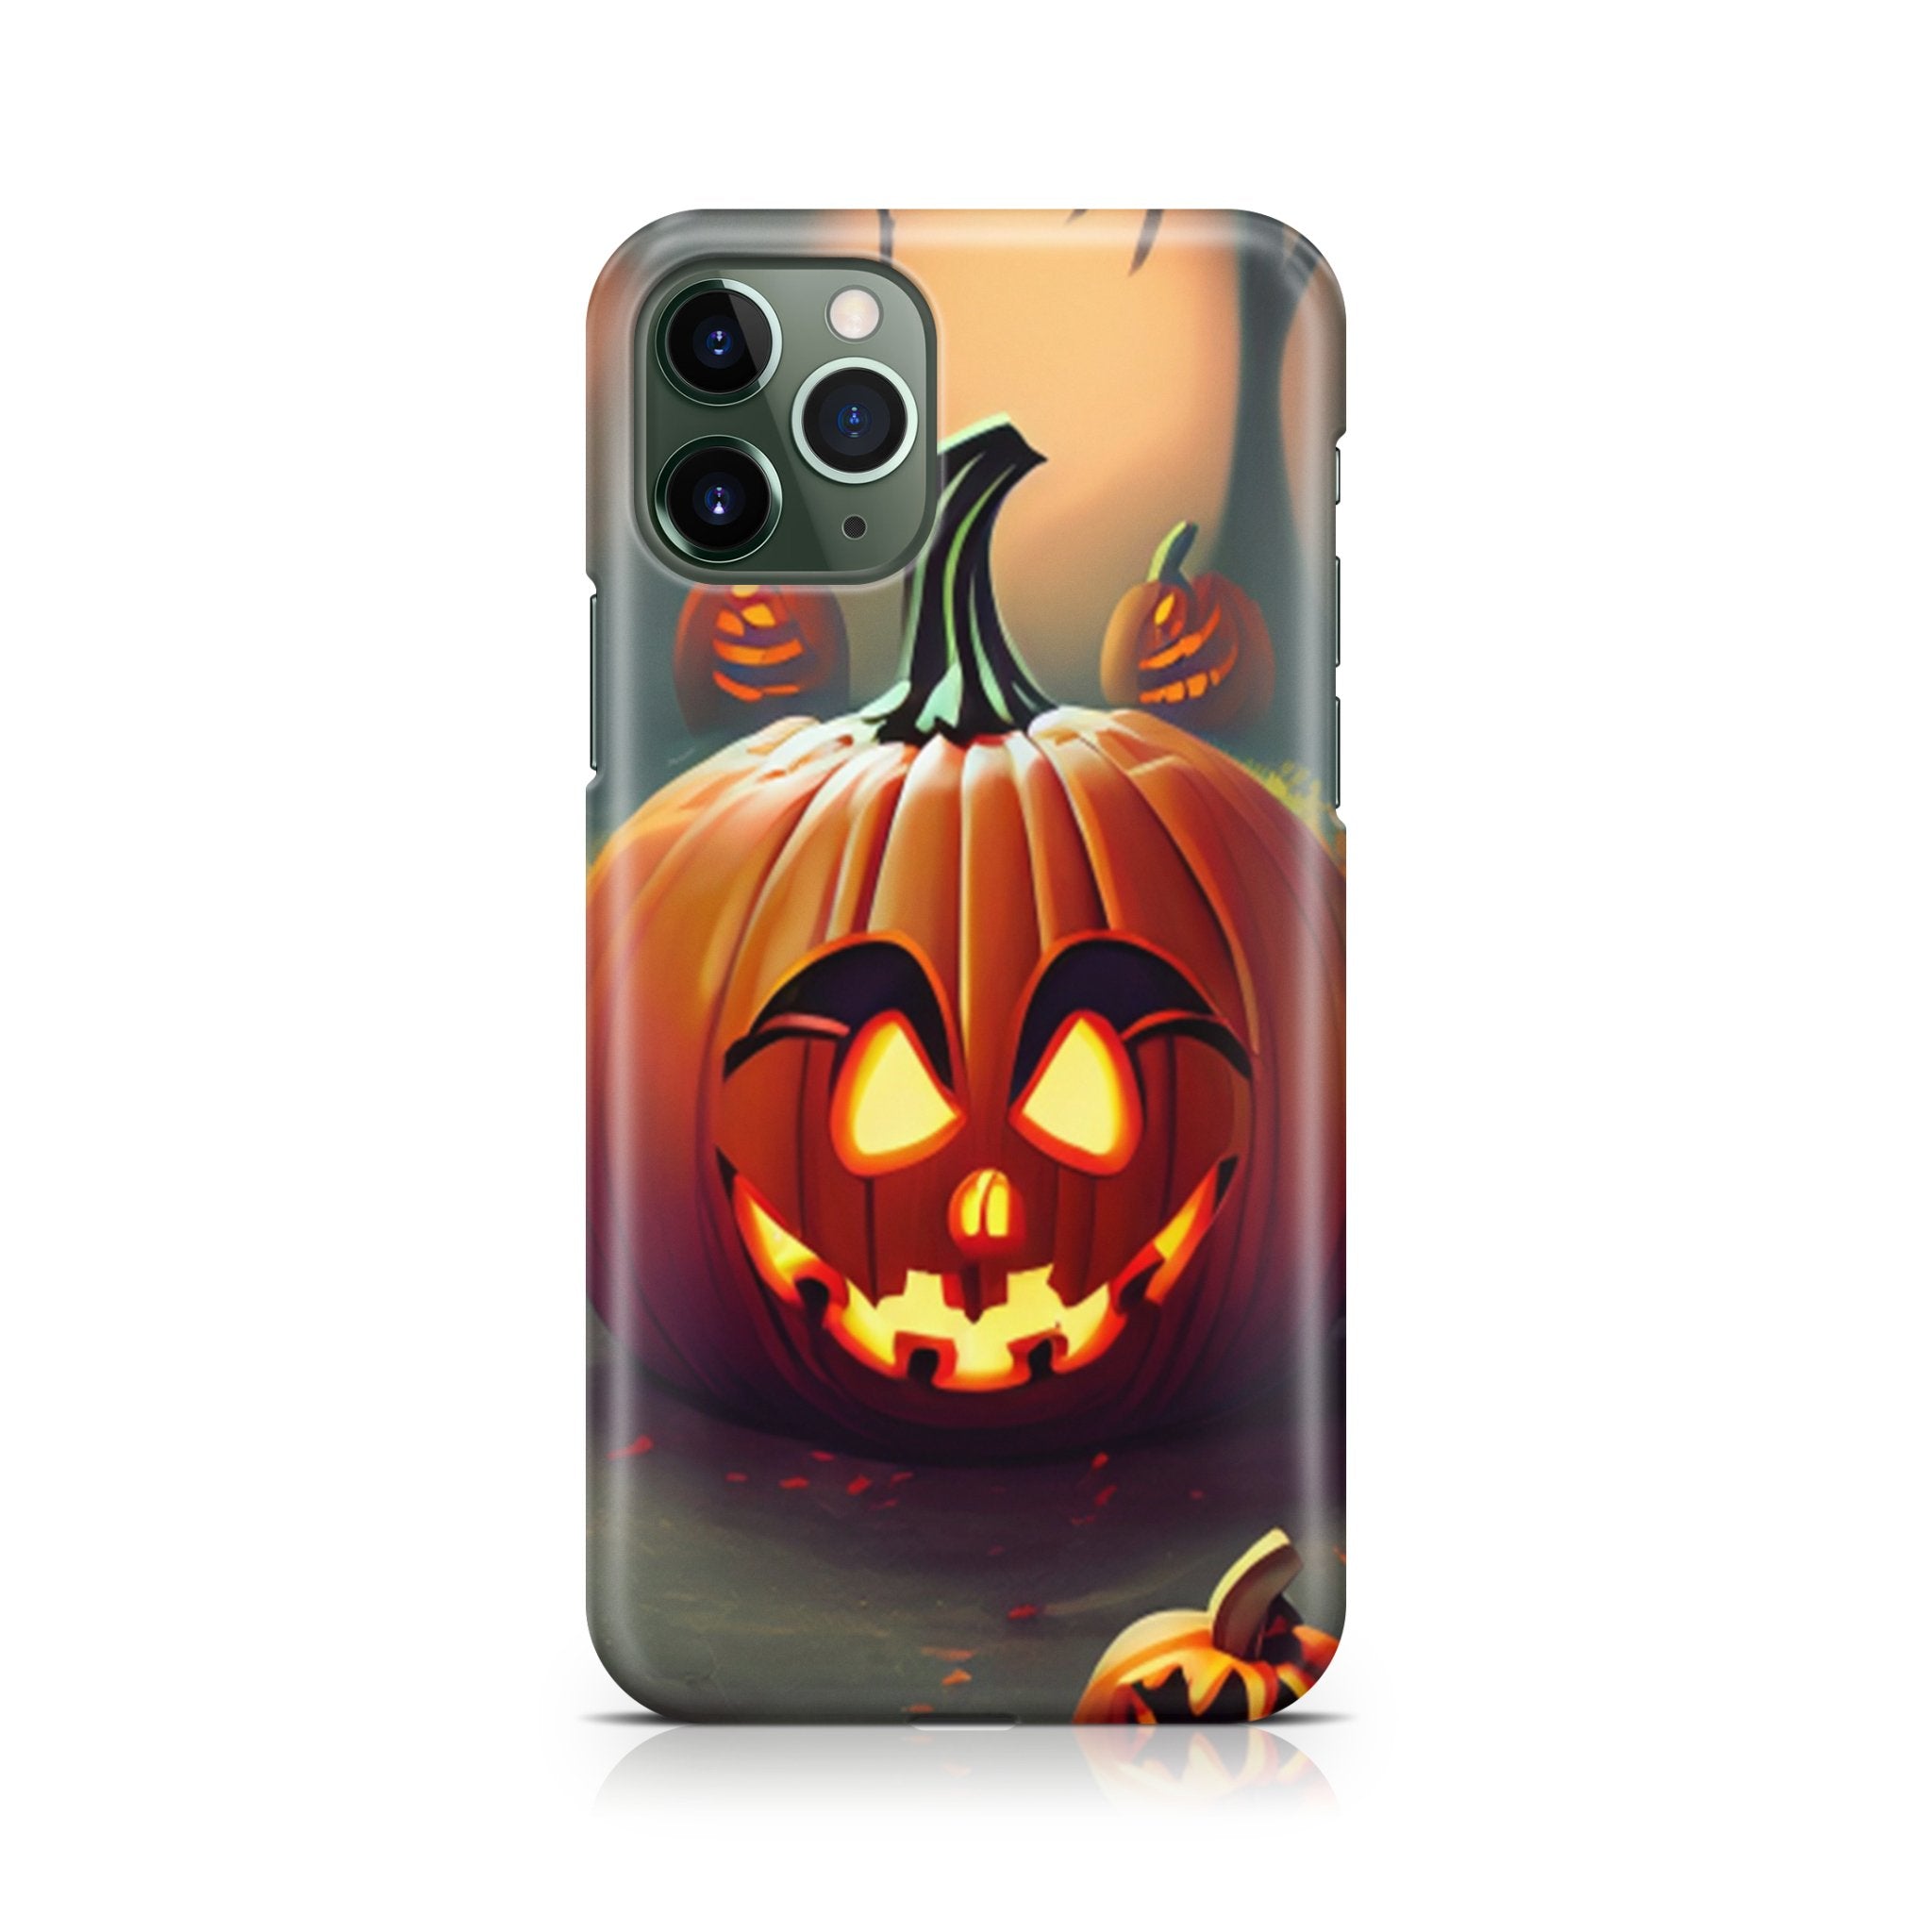 Jack-O-Lantern - iPhone phone case designs by CaseSwagger